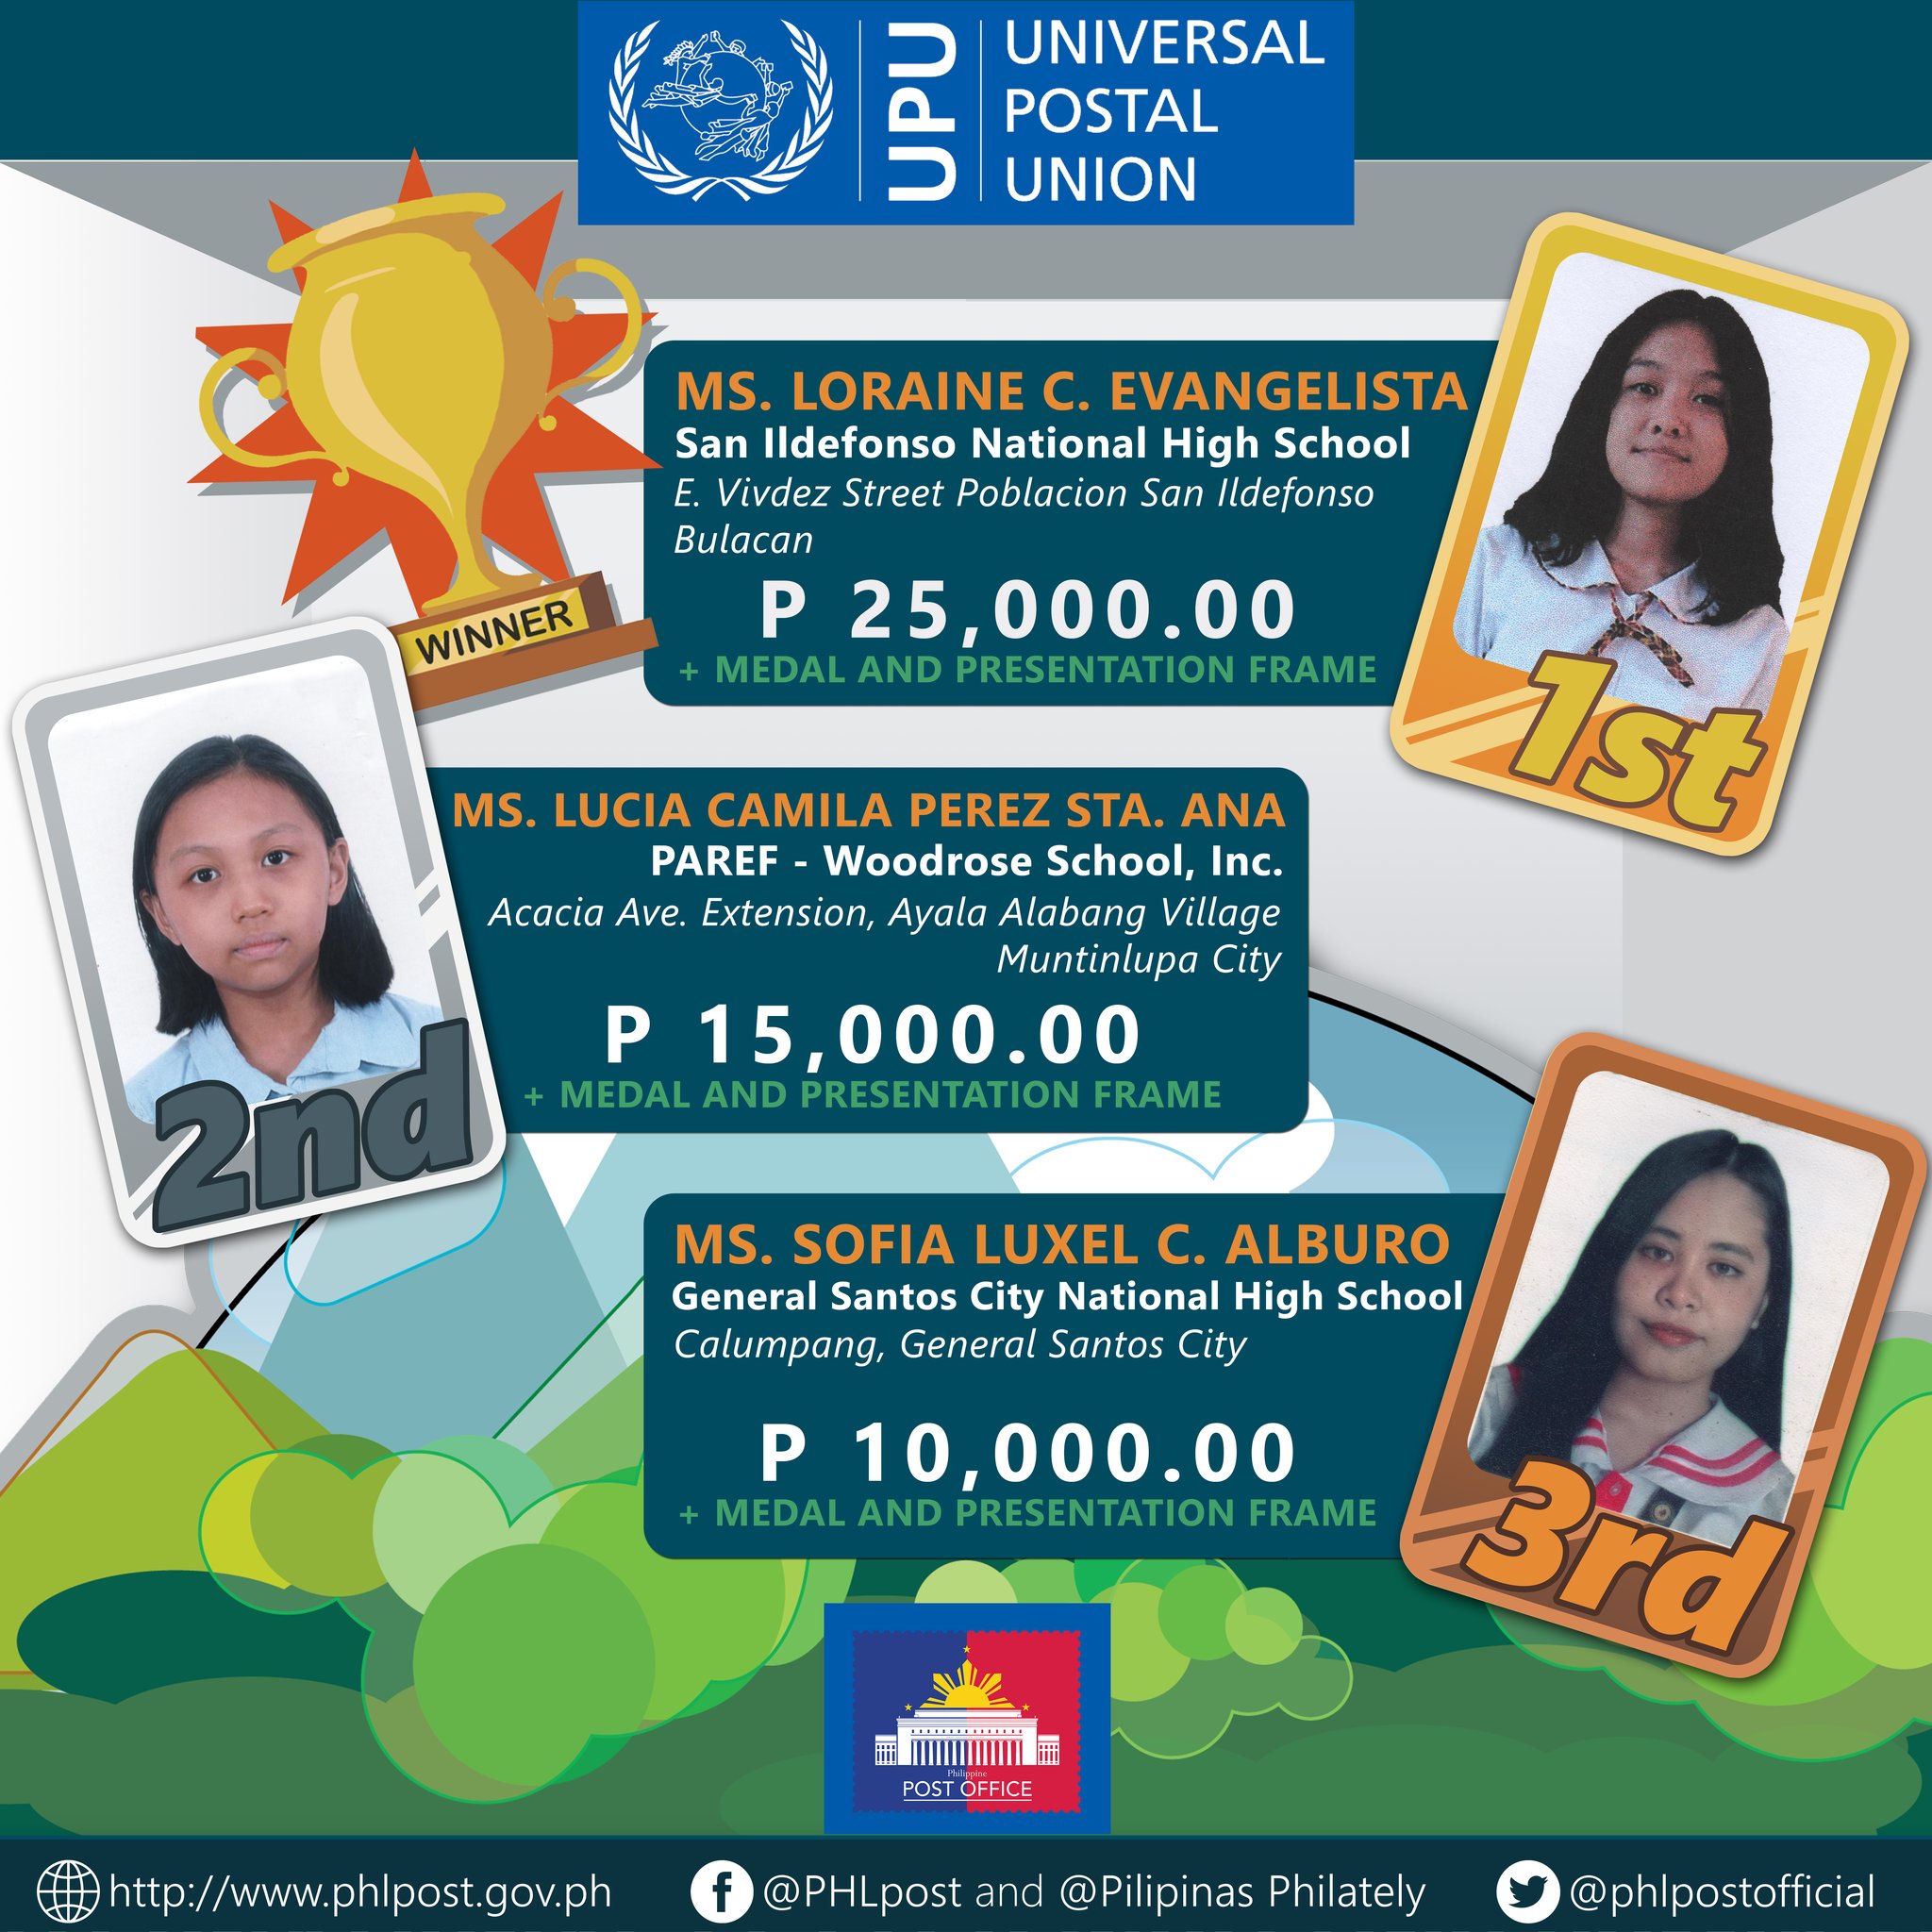 Philippine Post Office, UPU announced letter writing competition winners